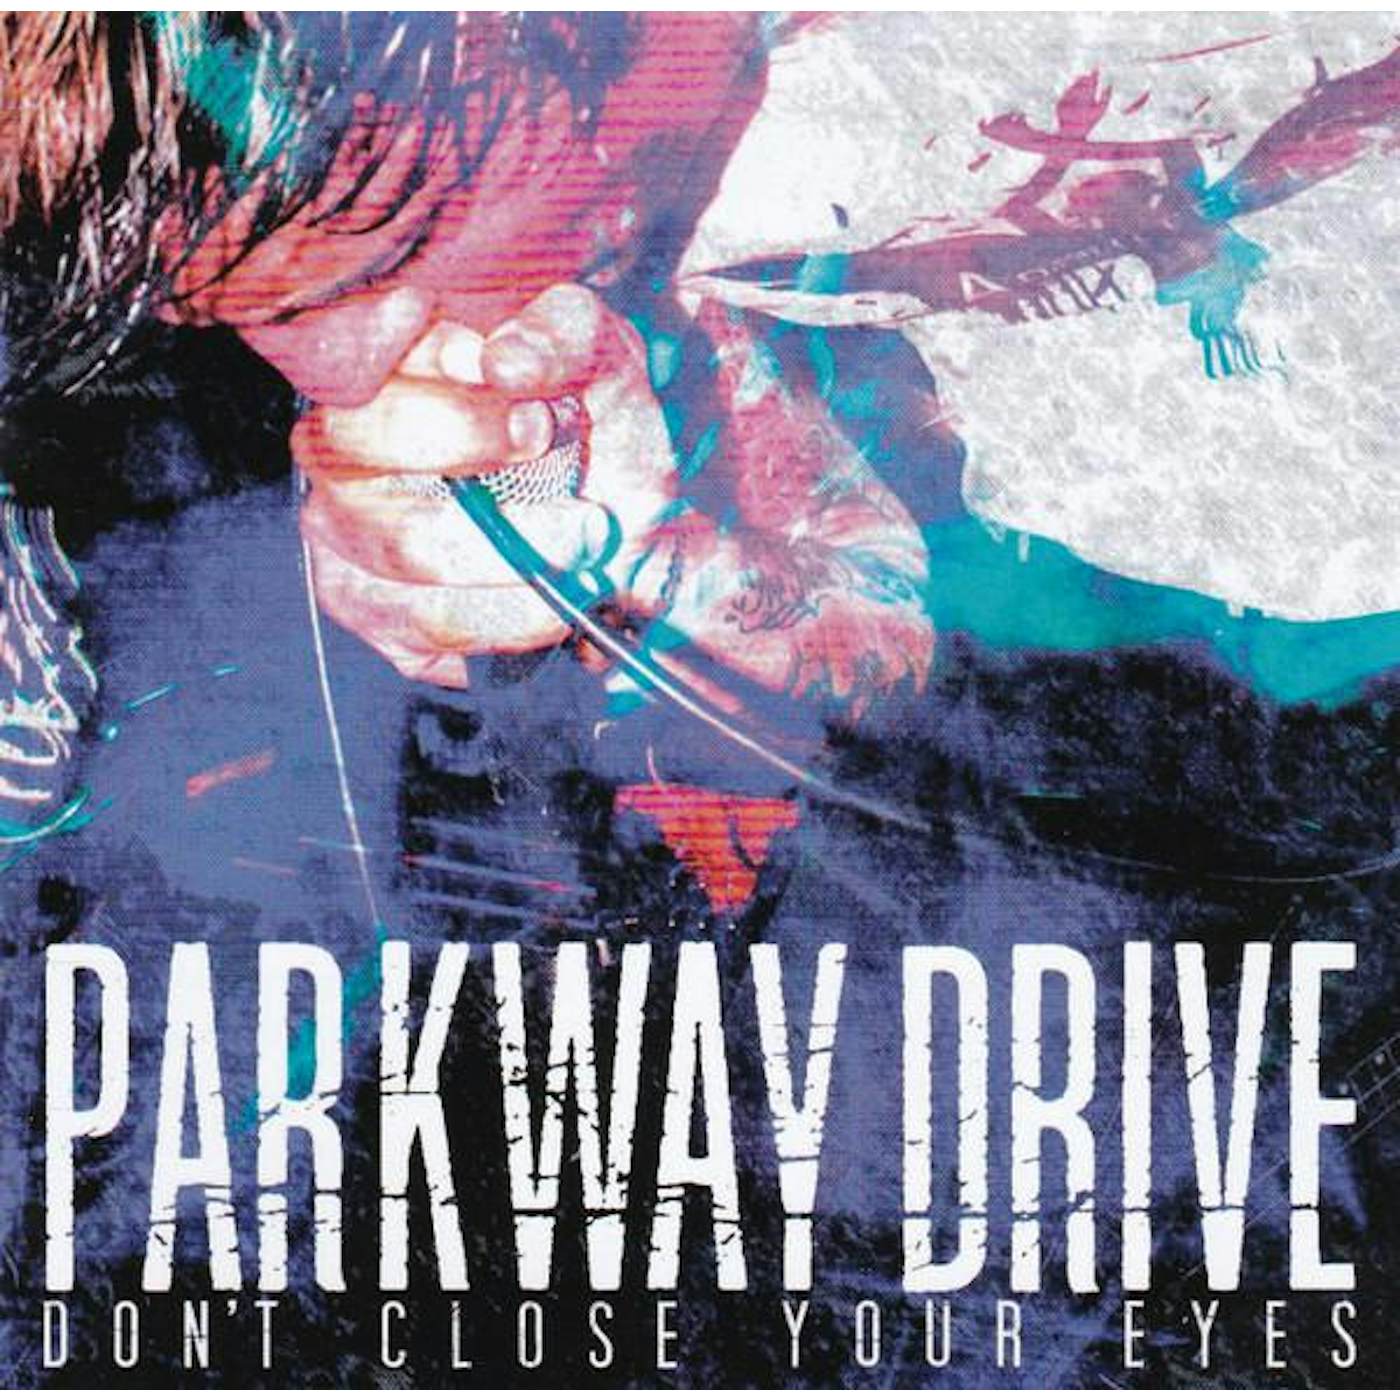 Parkway Drive DON'T CLOSE YOUR EYES CD